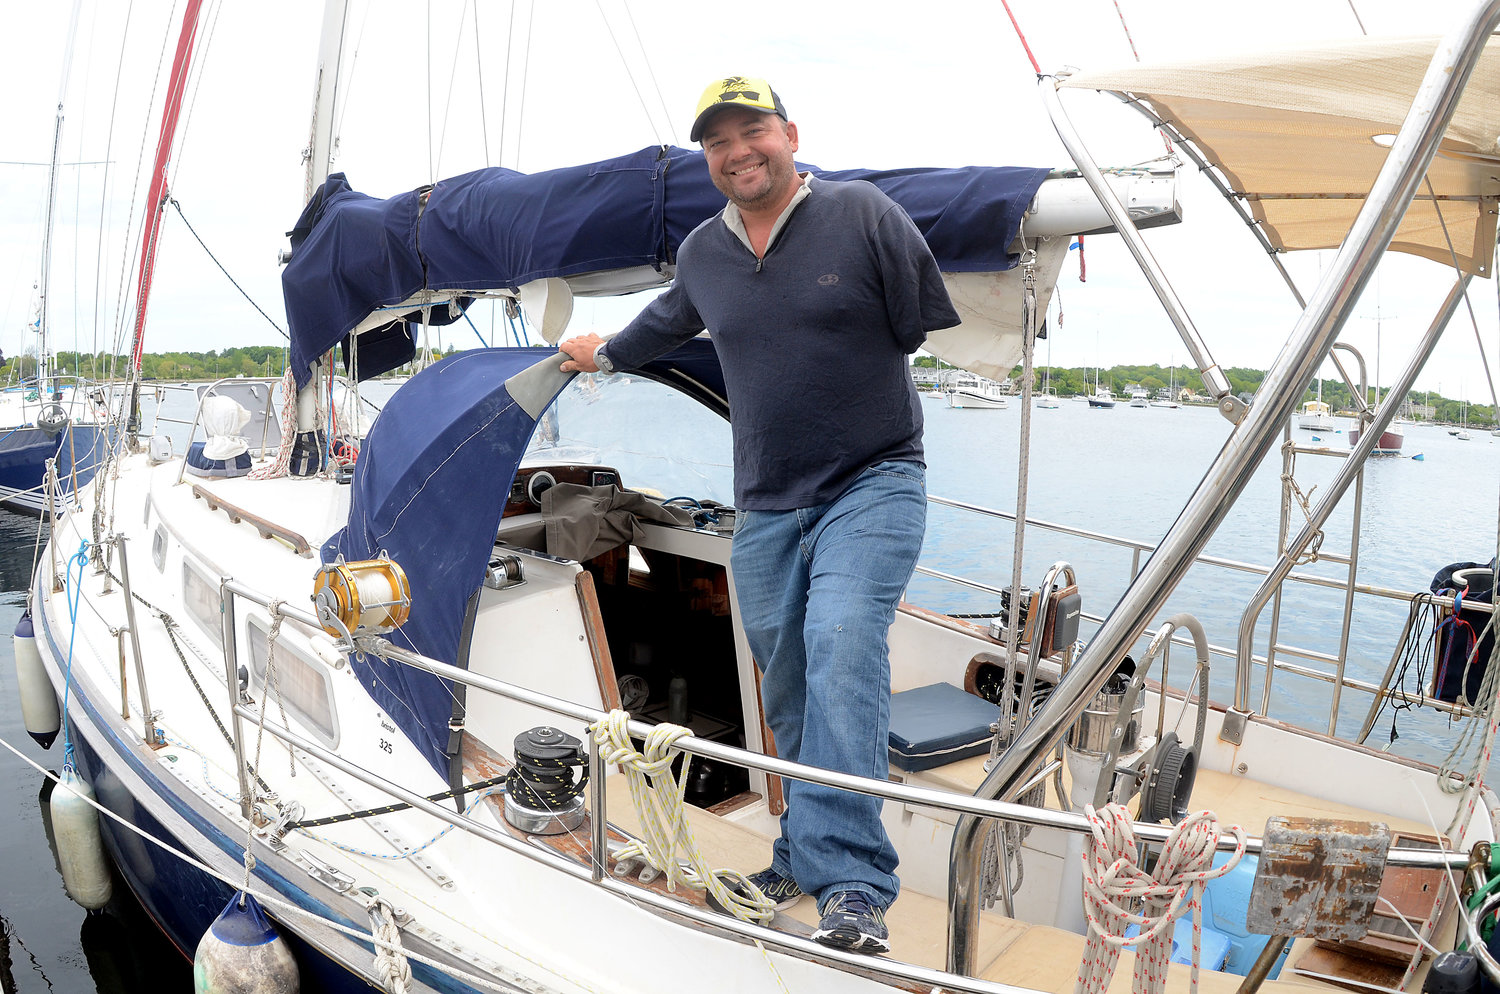 Dustin Reynolds stands aboard Tiama, a Bristol 35 originally launched from Bristol Marine 37 years ago and now docked there for a short time. After losing two limbs when a drunk driver hit him head-on, he decided to sail around the world alone — after he first learned how to sail.